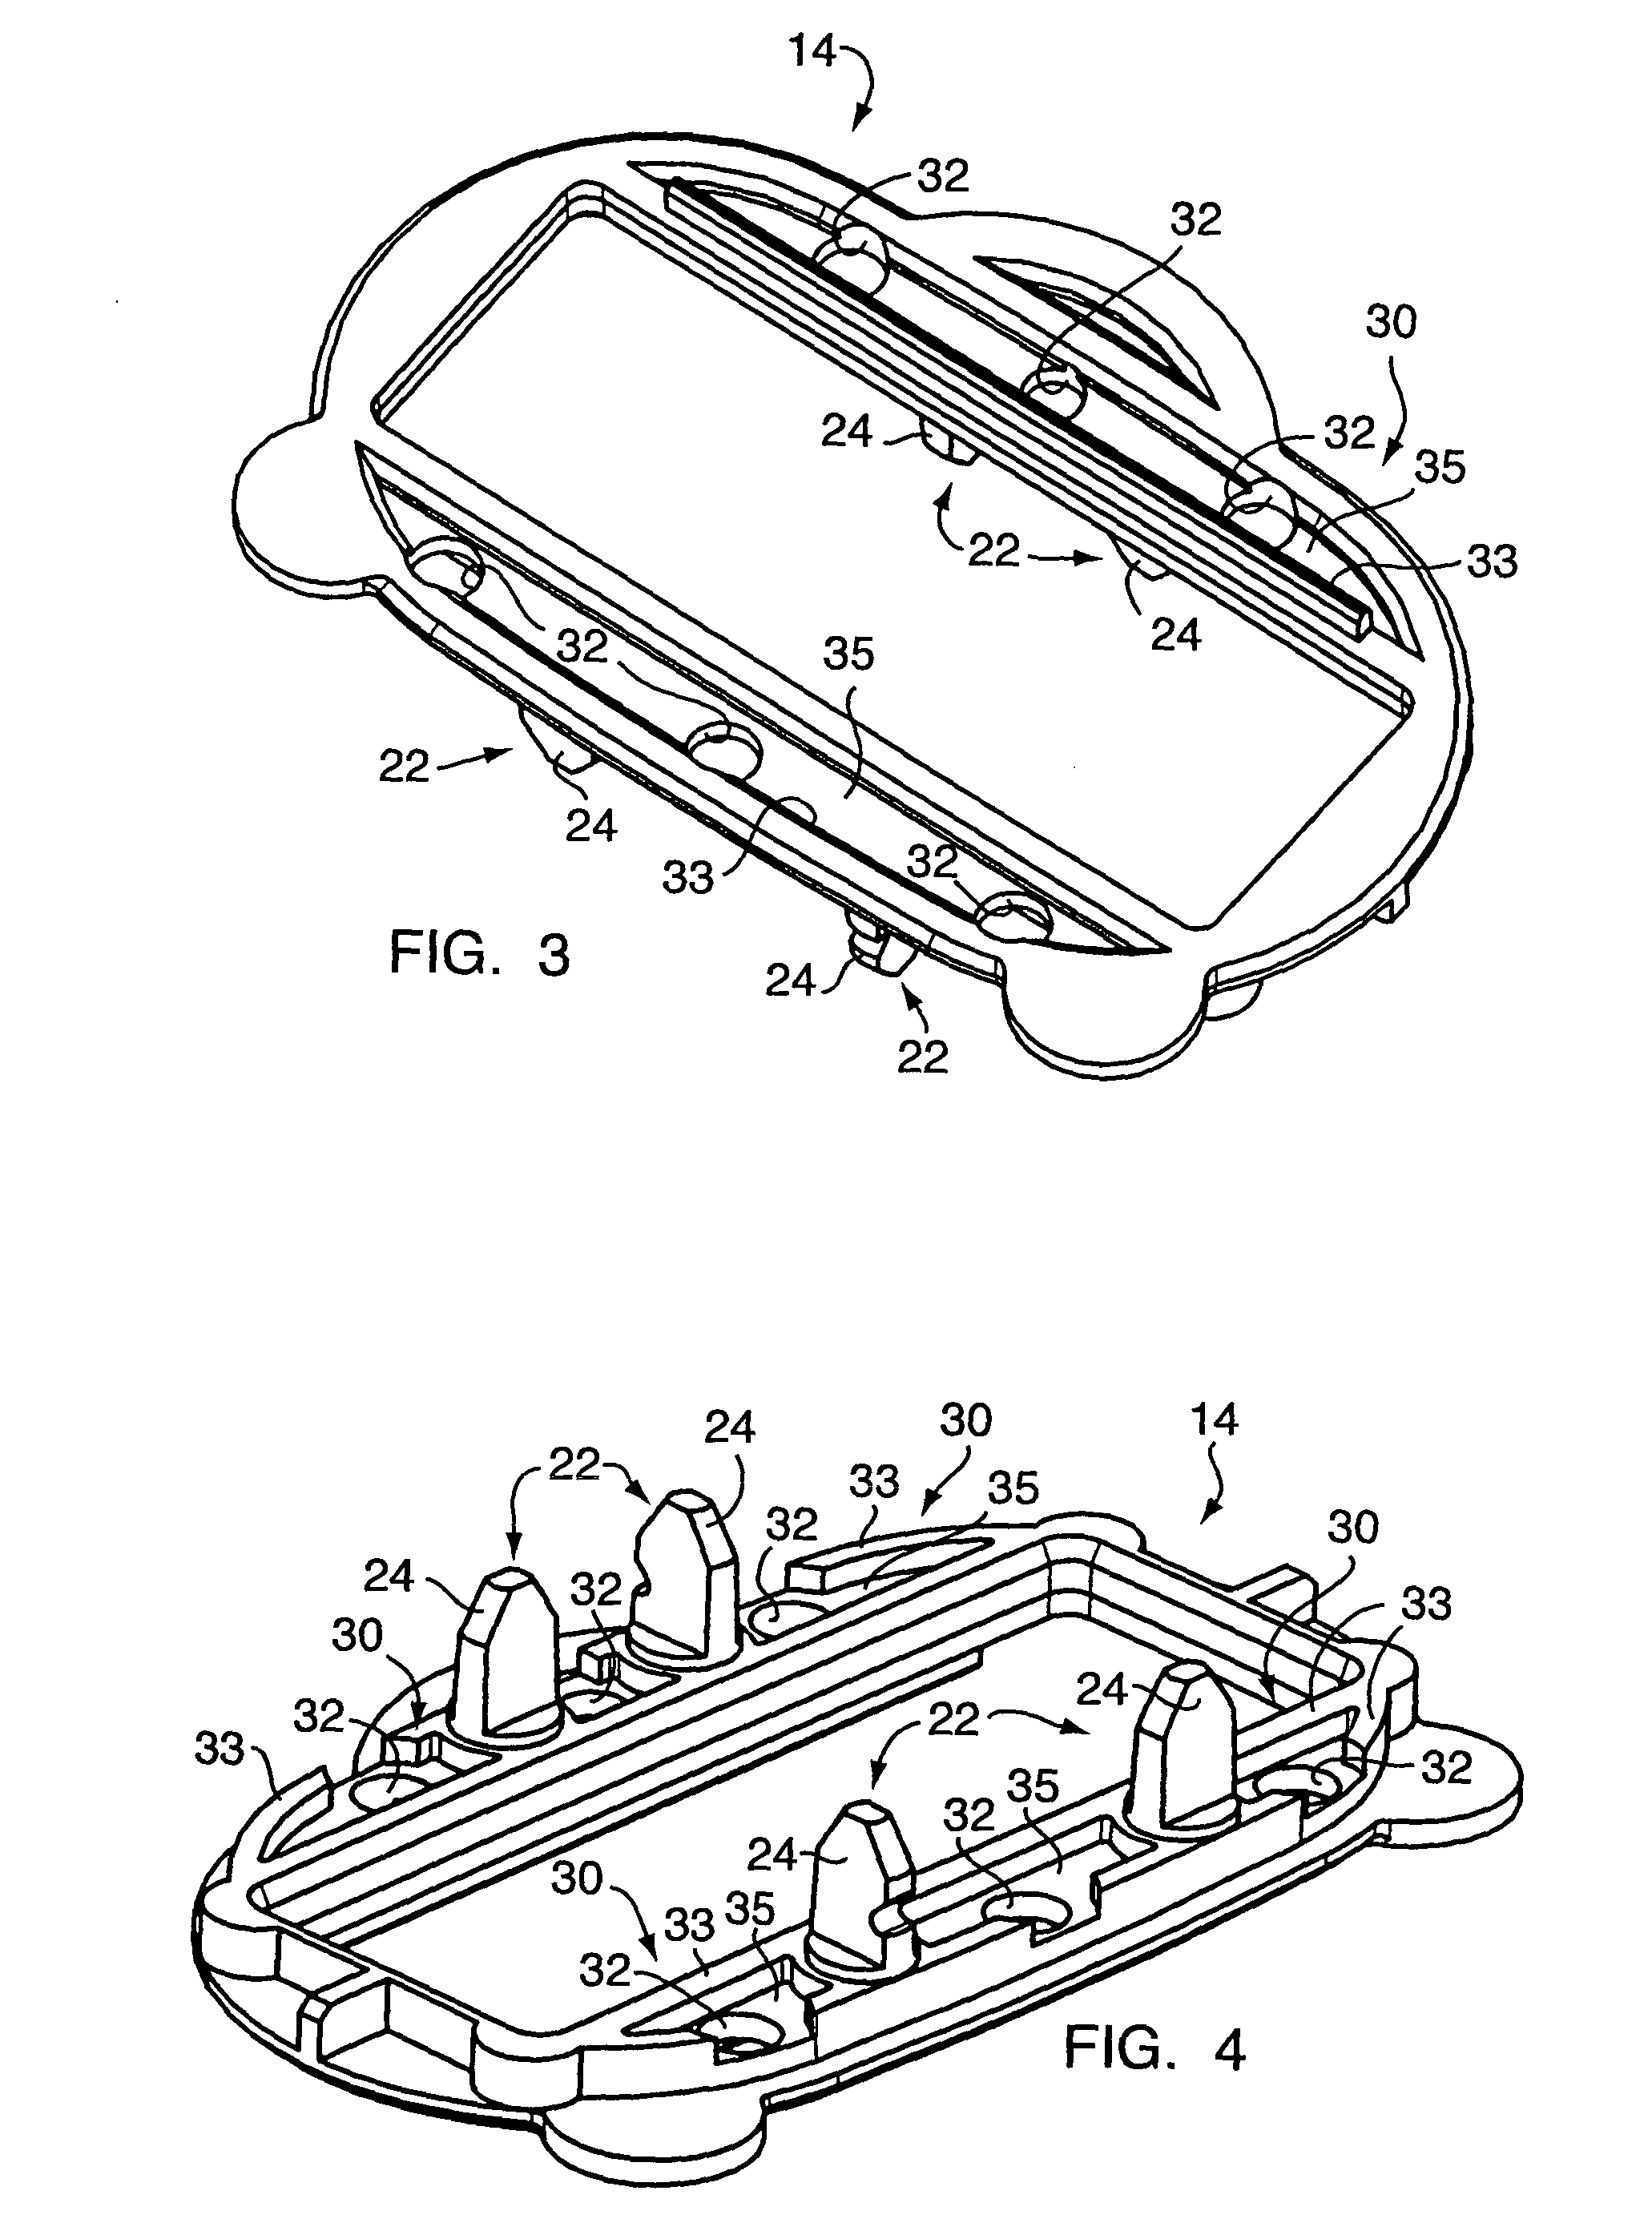 Method for producing a shaving aid cartridge